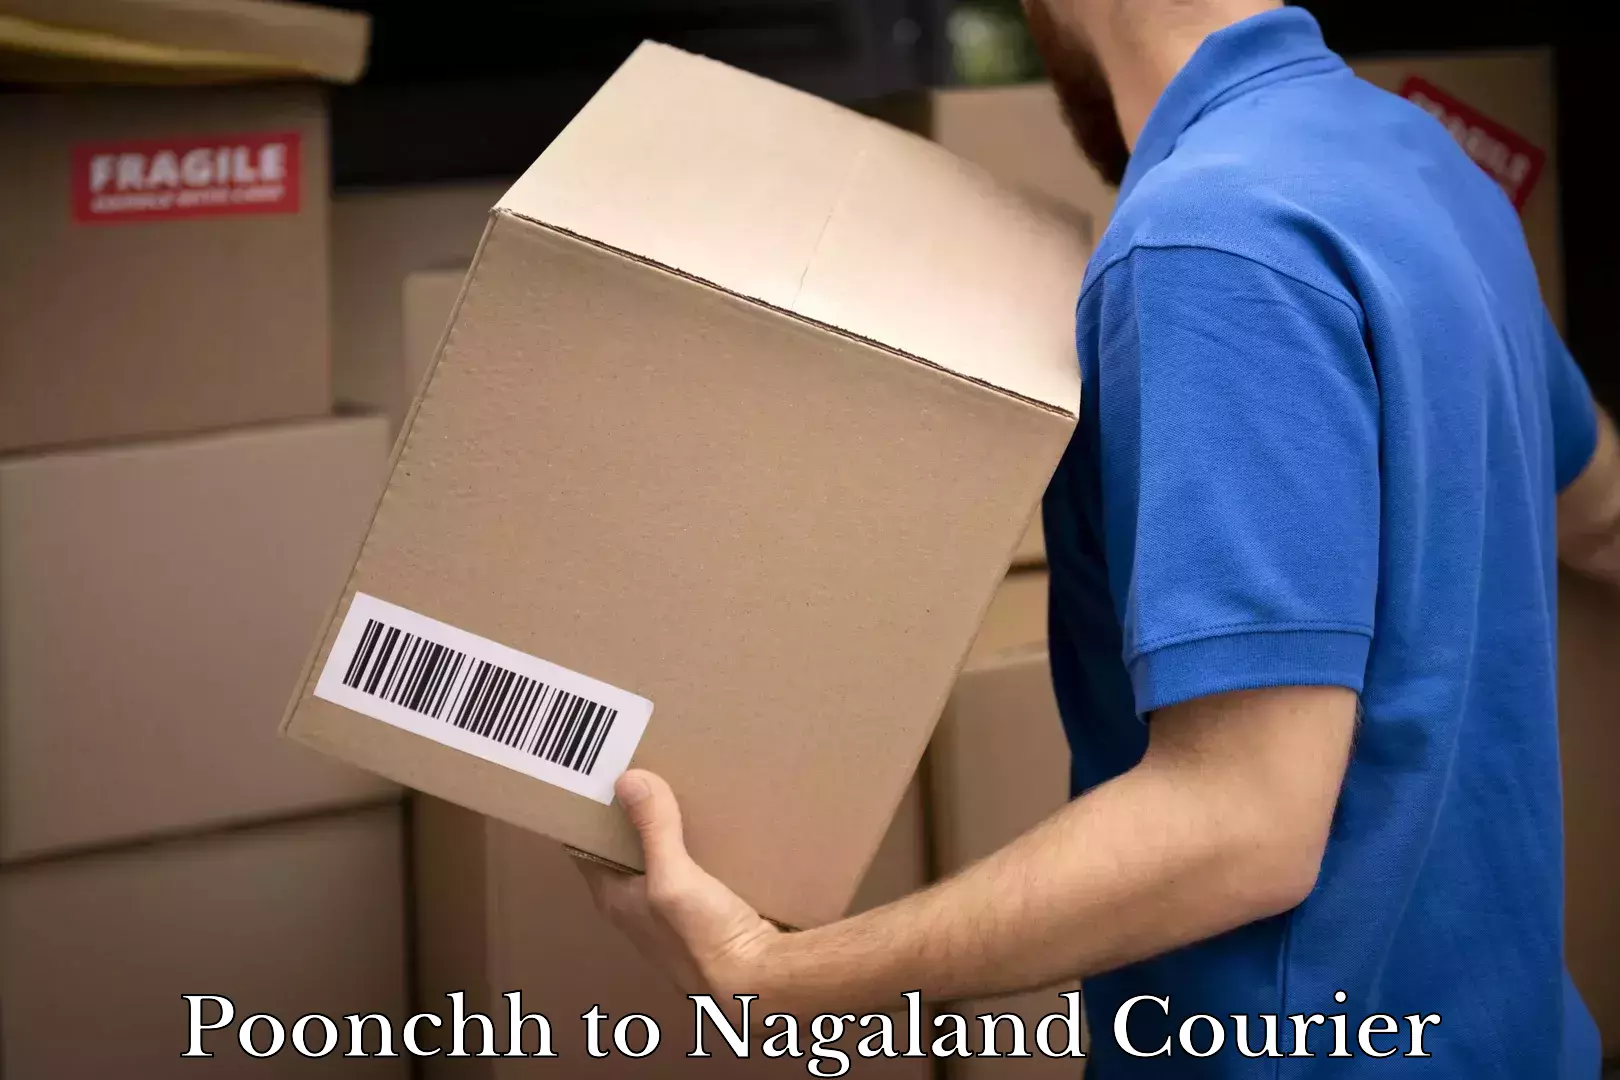 Ground shipping Poonchh to Nagaland